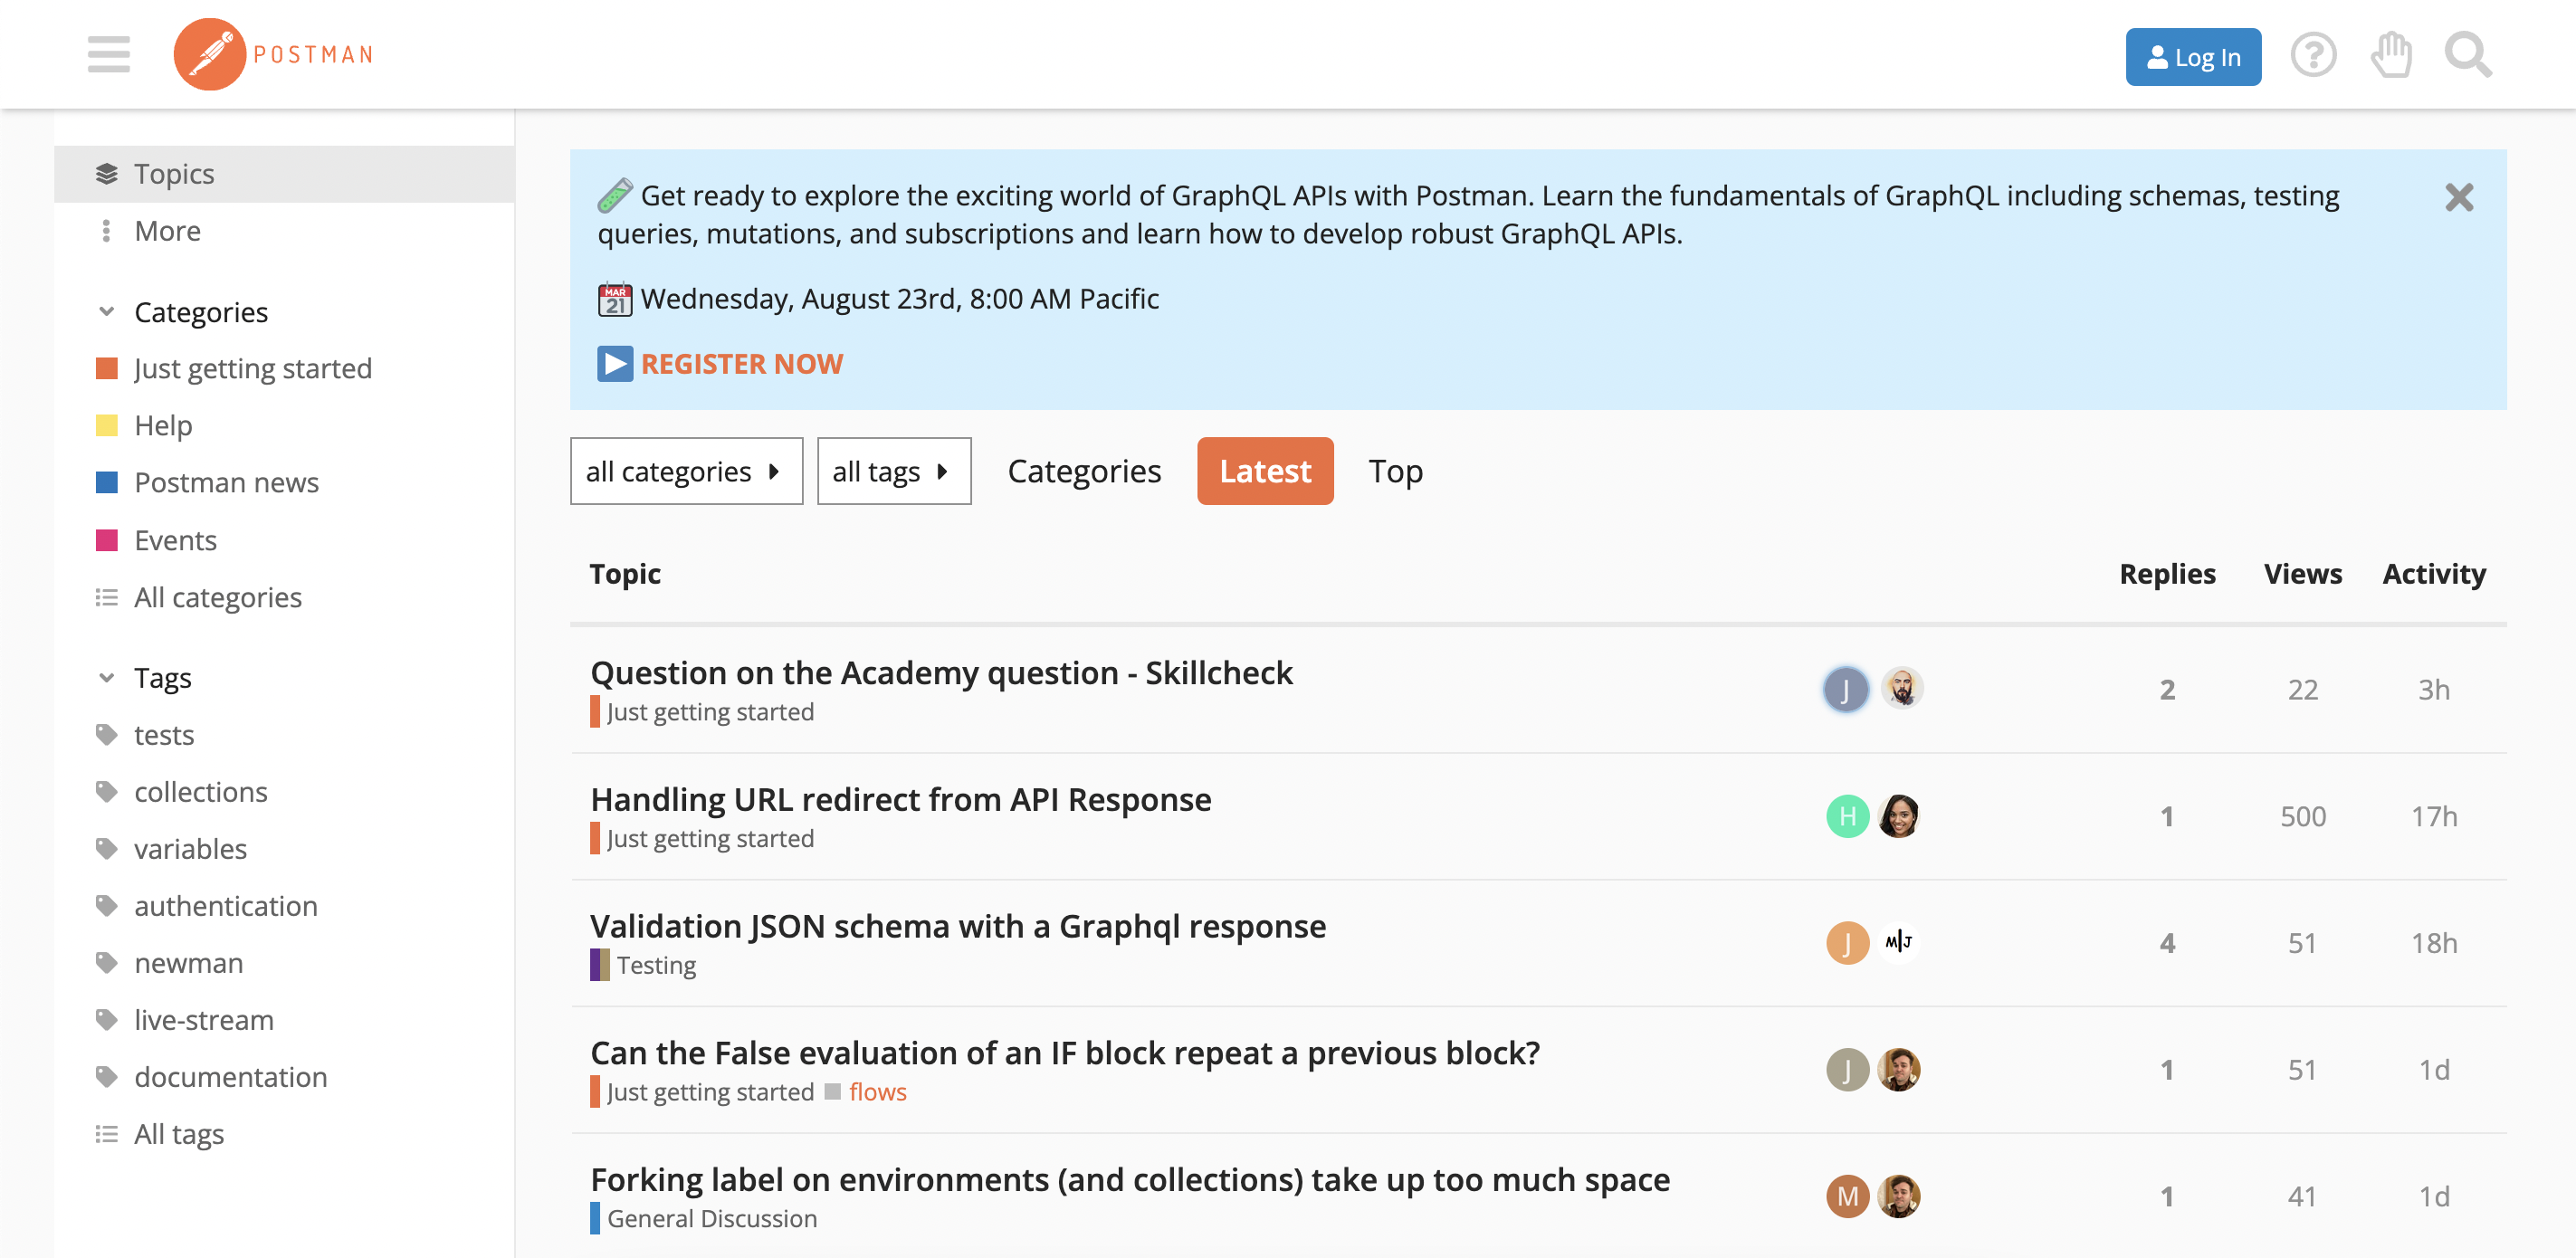 Topics and queries on the Postman community page.